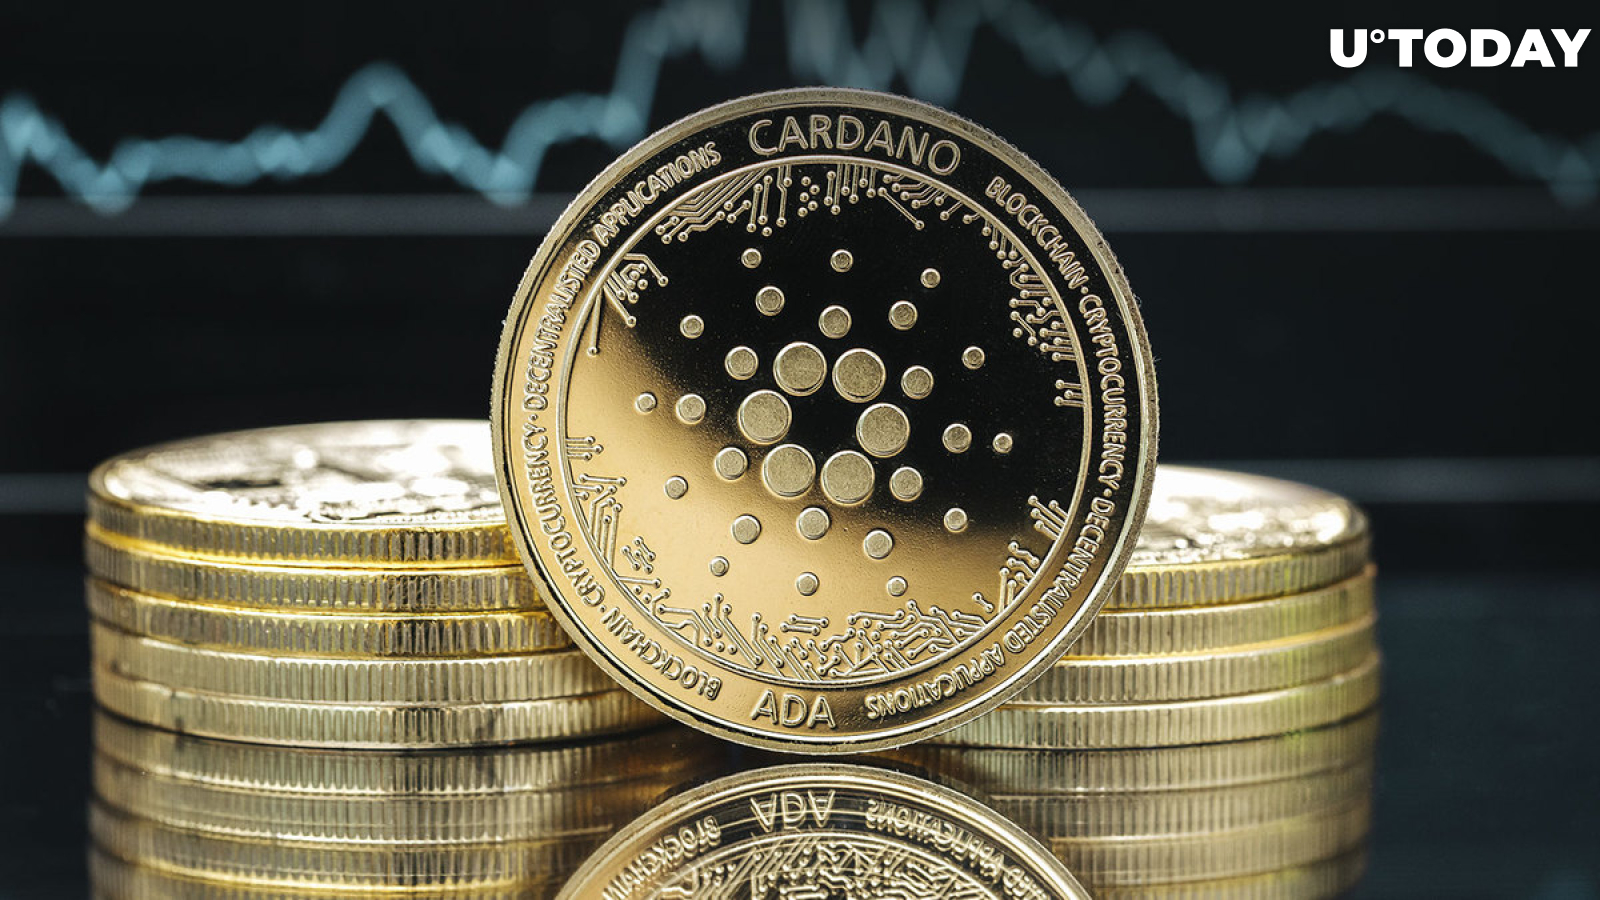 Cardano Sees $2.3 Billion Inflow into Its Market Cap in Days: Details